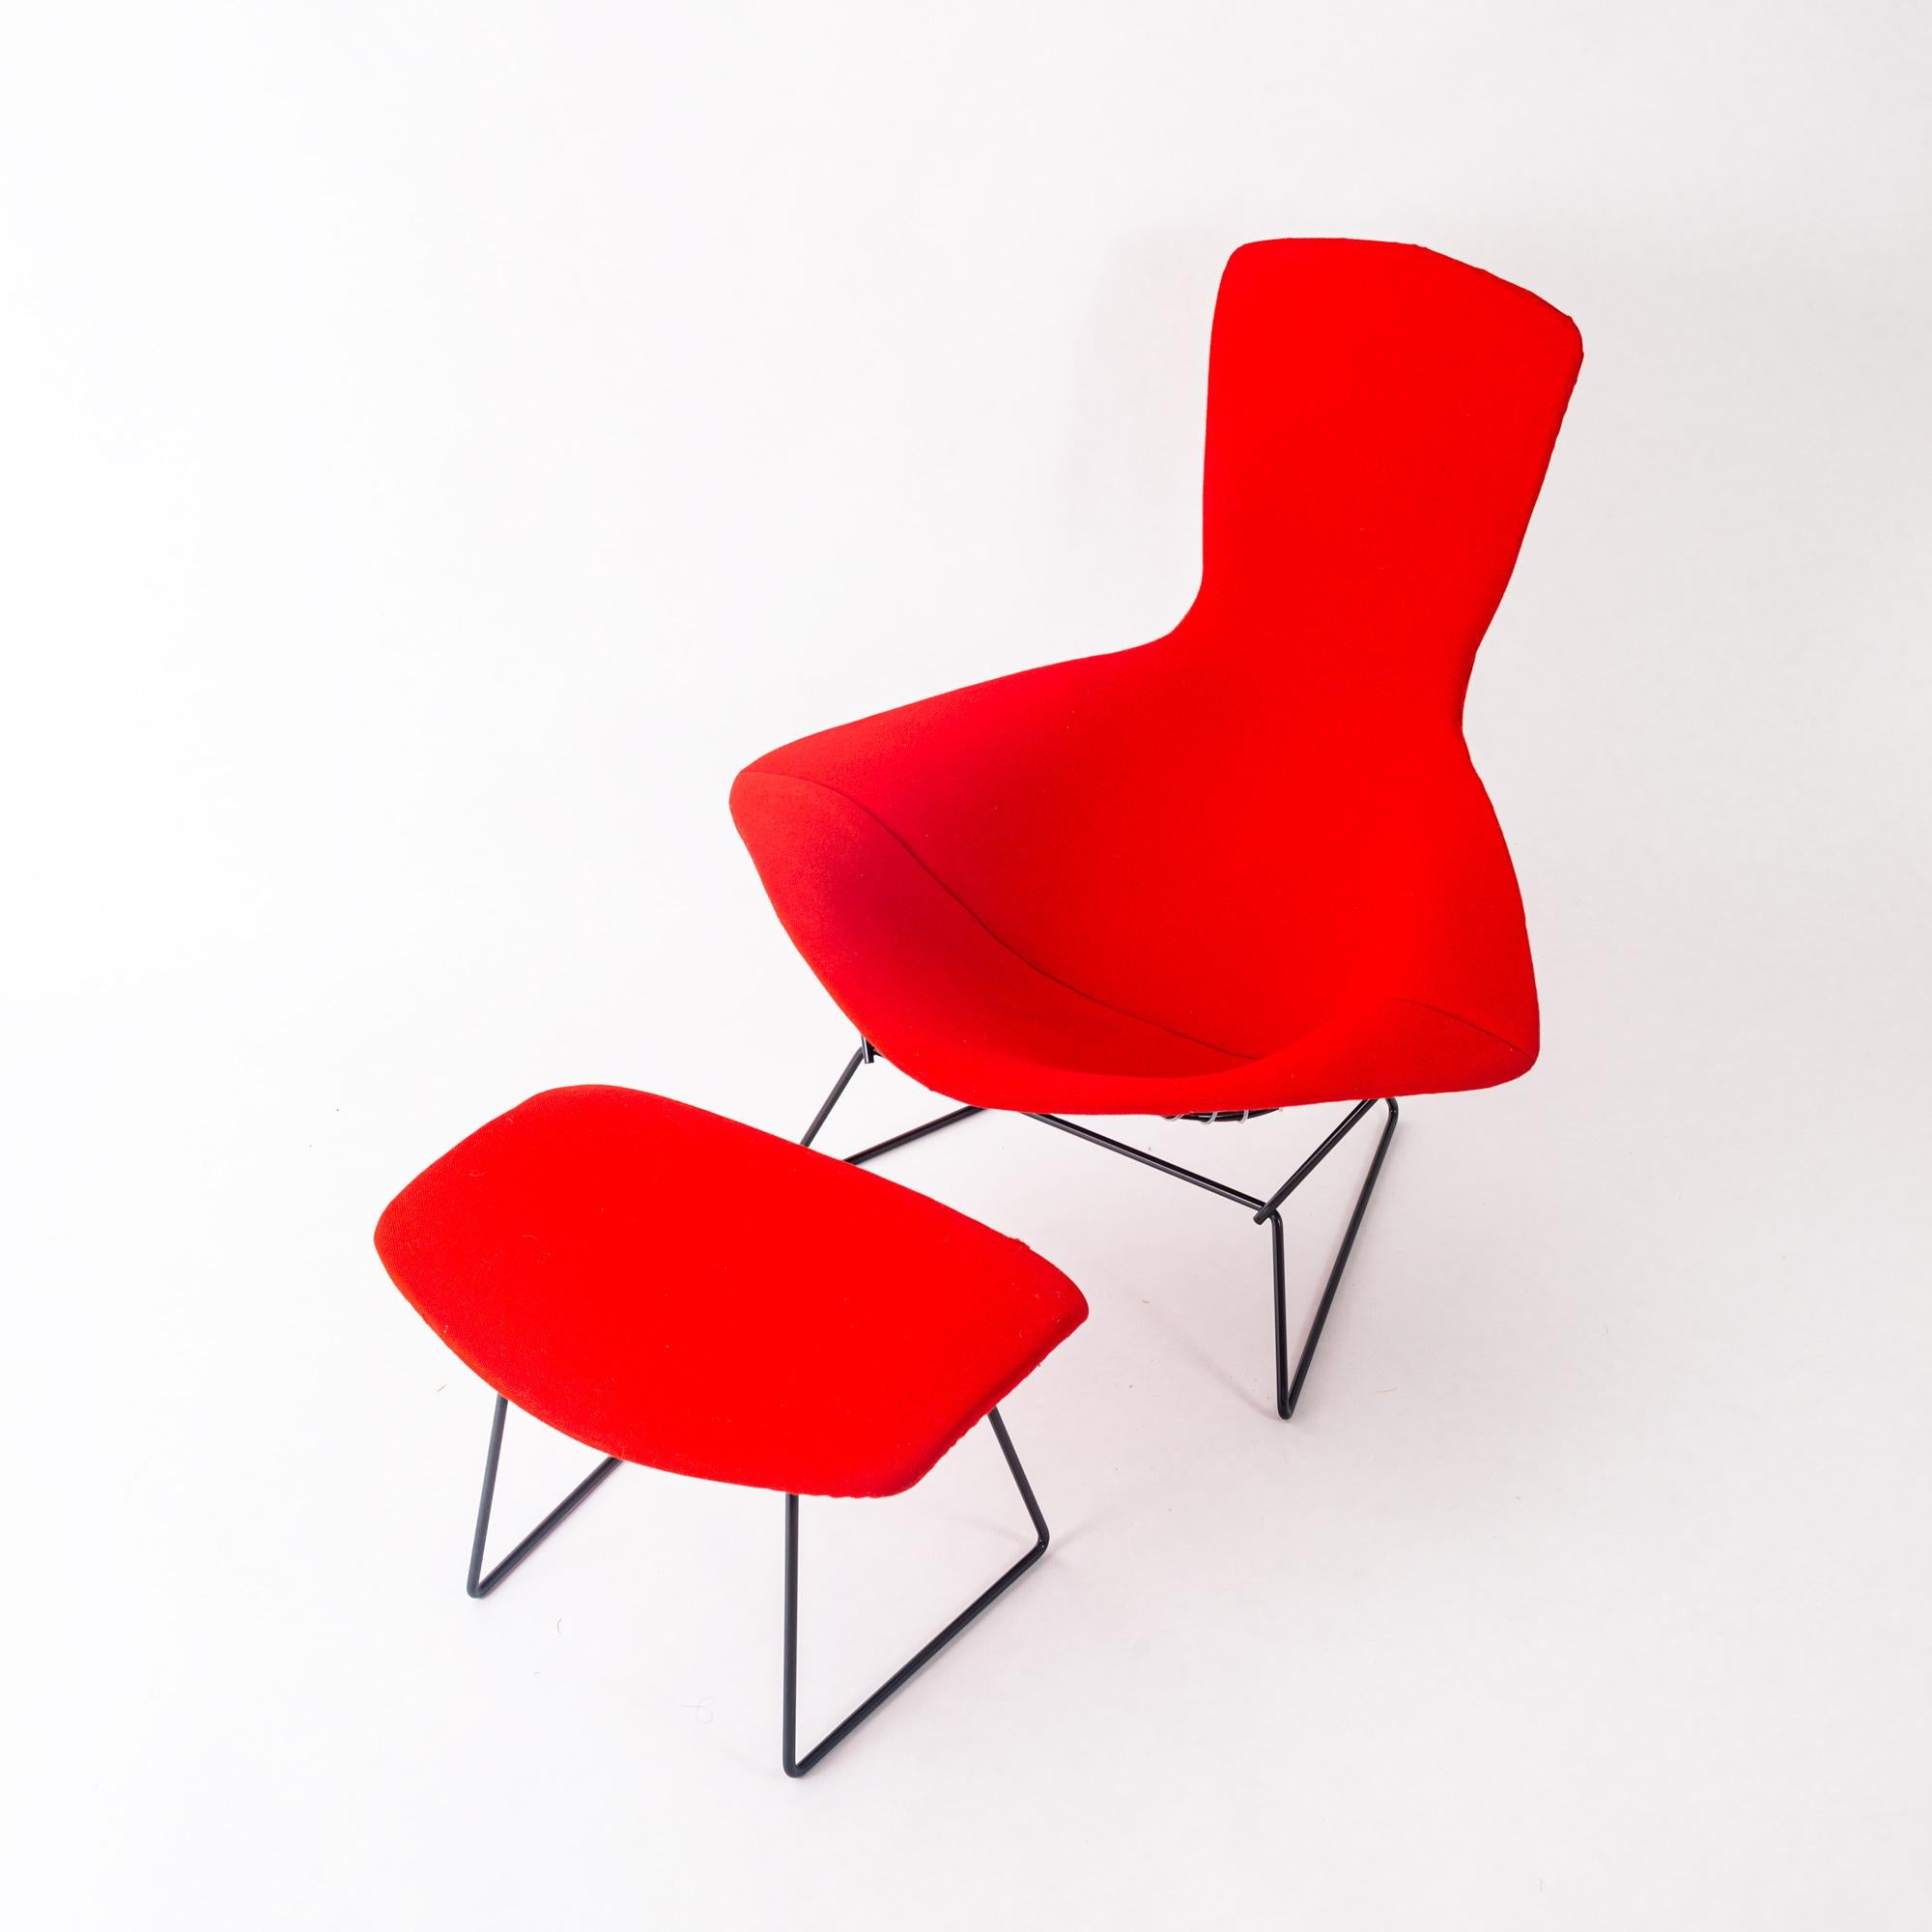 Original & authentic Harry Bertoia Bird chair & ottoman for Knoll, circa 1960s. Original fabric flame red slip cover on metal frame that recently went through full metal work and freshly powder coated in classic black. Chair cover still retains